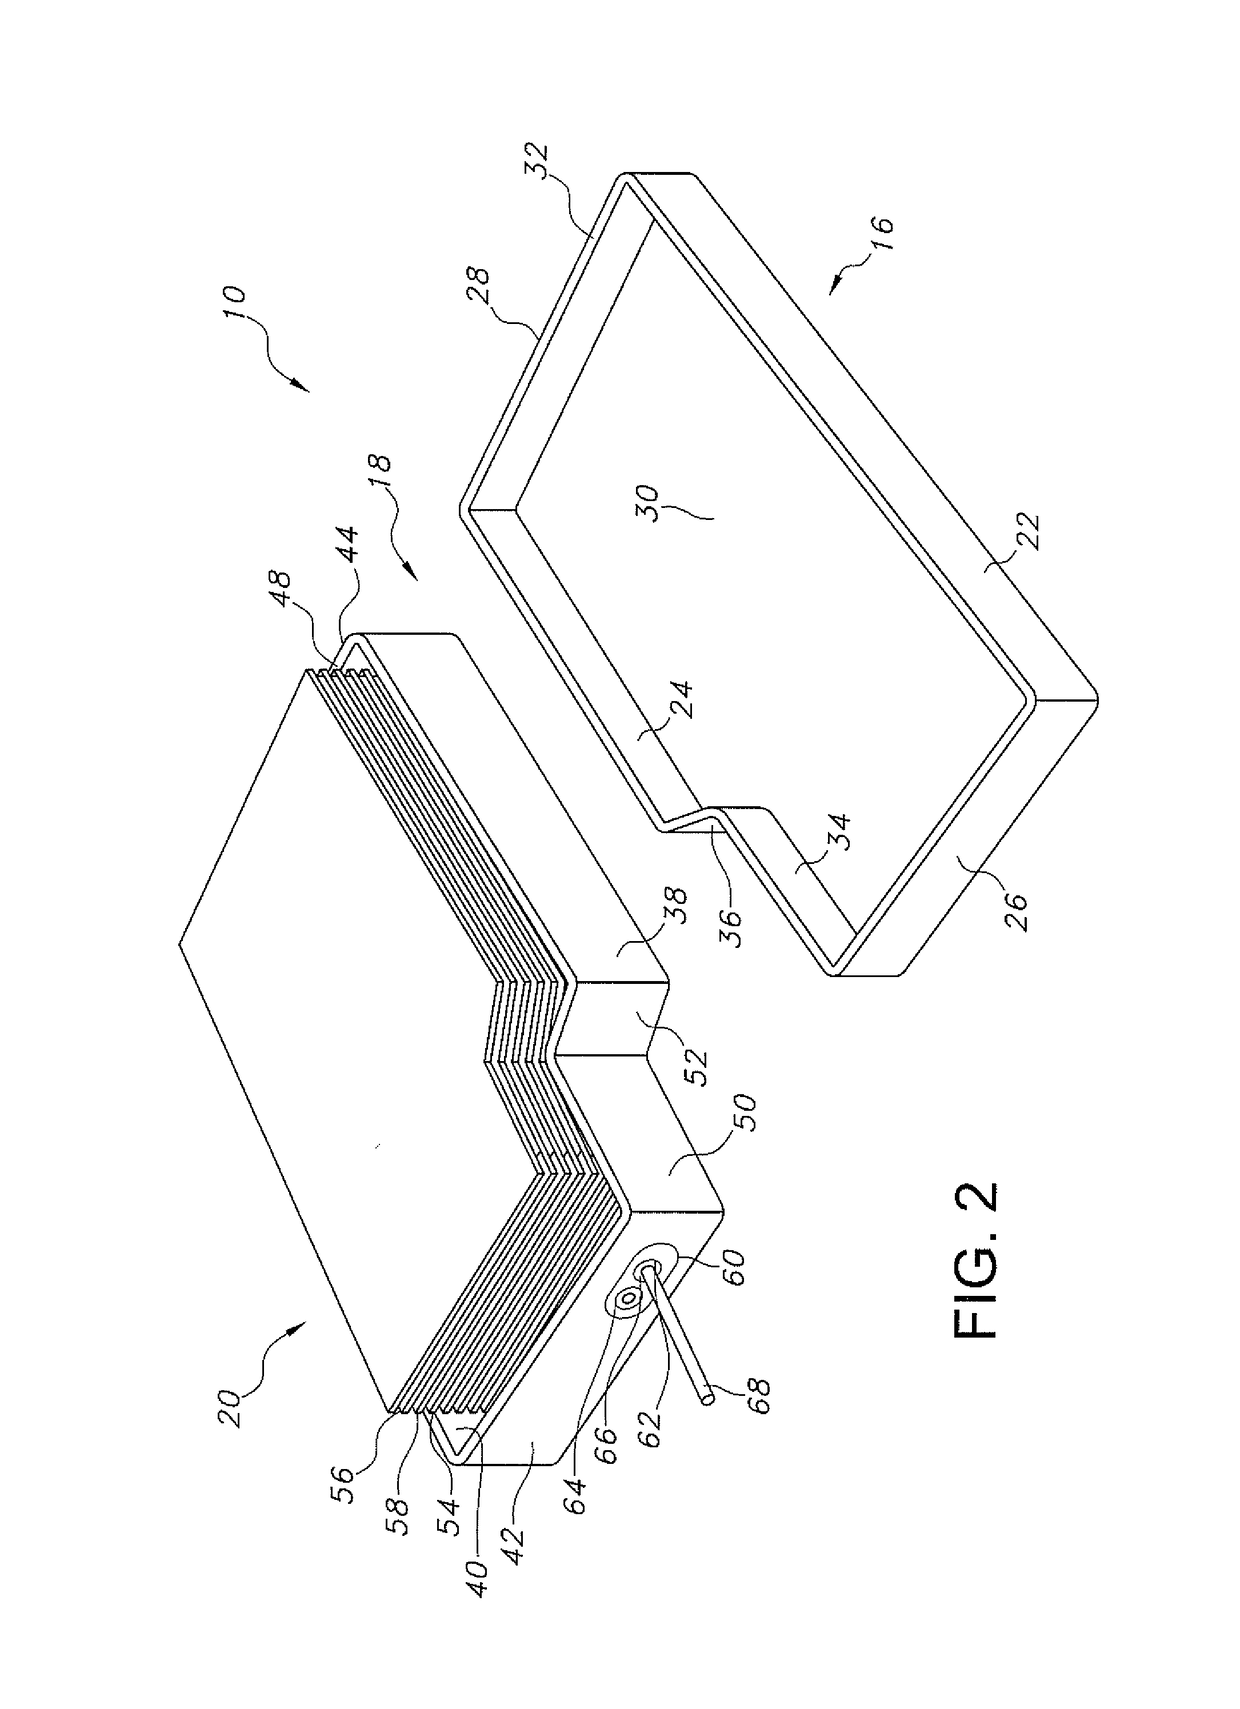 Closure system for the electrolyte fill port of an electrochemical cell